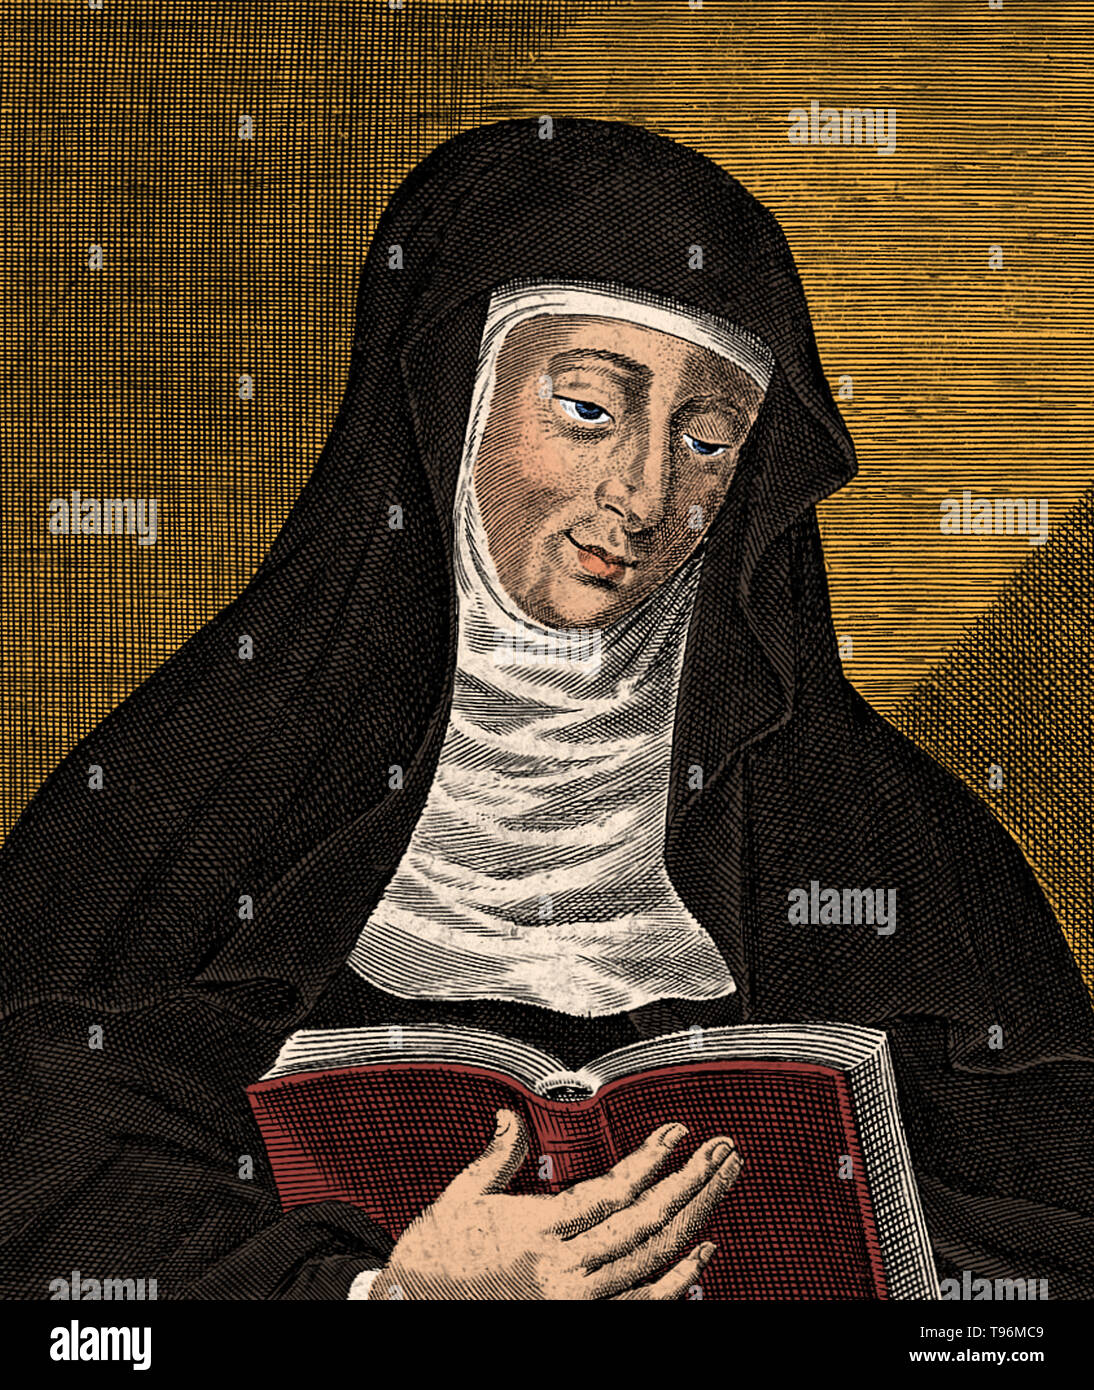 Hildegard of Bingen (1098 - September 17, 1179) was a German Benedictine abbess, writer, composer, philosopher, Christian mystic, visionary, and polymath. She is considered to be the founder of scientific natural history in Germany. One of her works as a composer, the Ordo Virtutum, is an early example of liturgical drama and arguably the oldest surviving morality play. Stock Photo